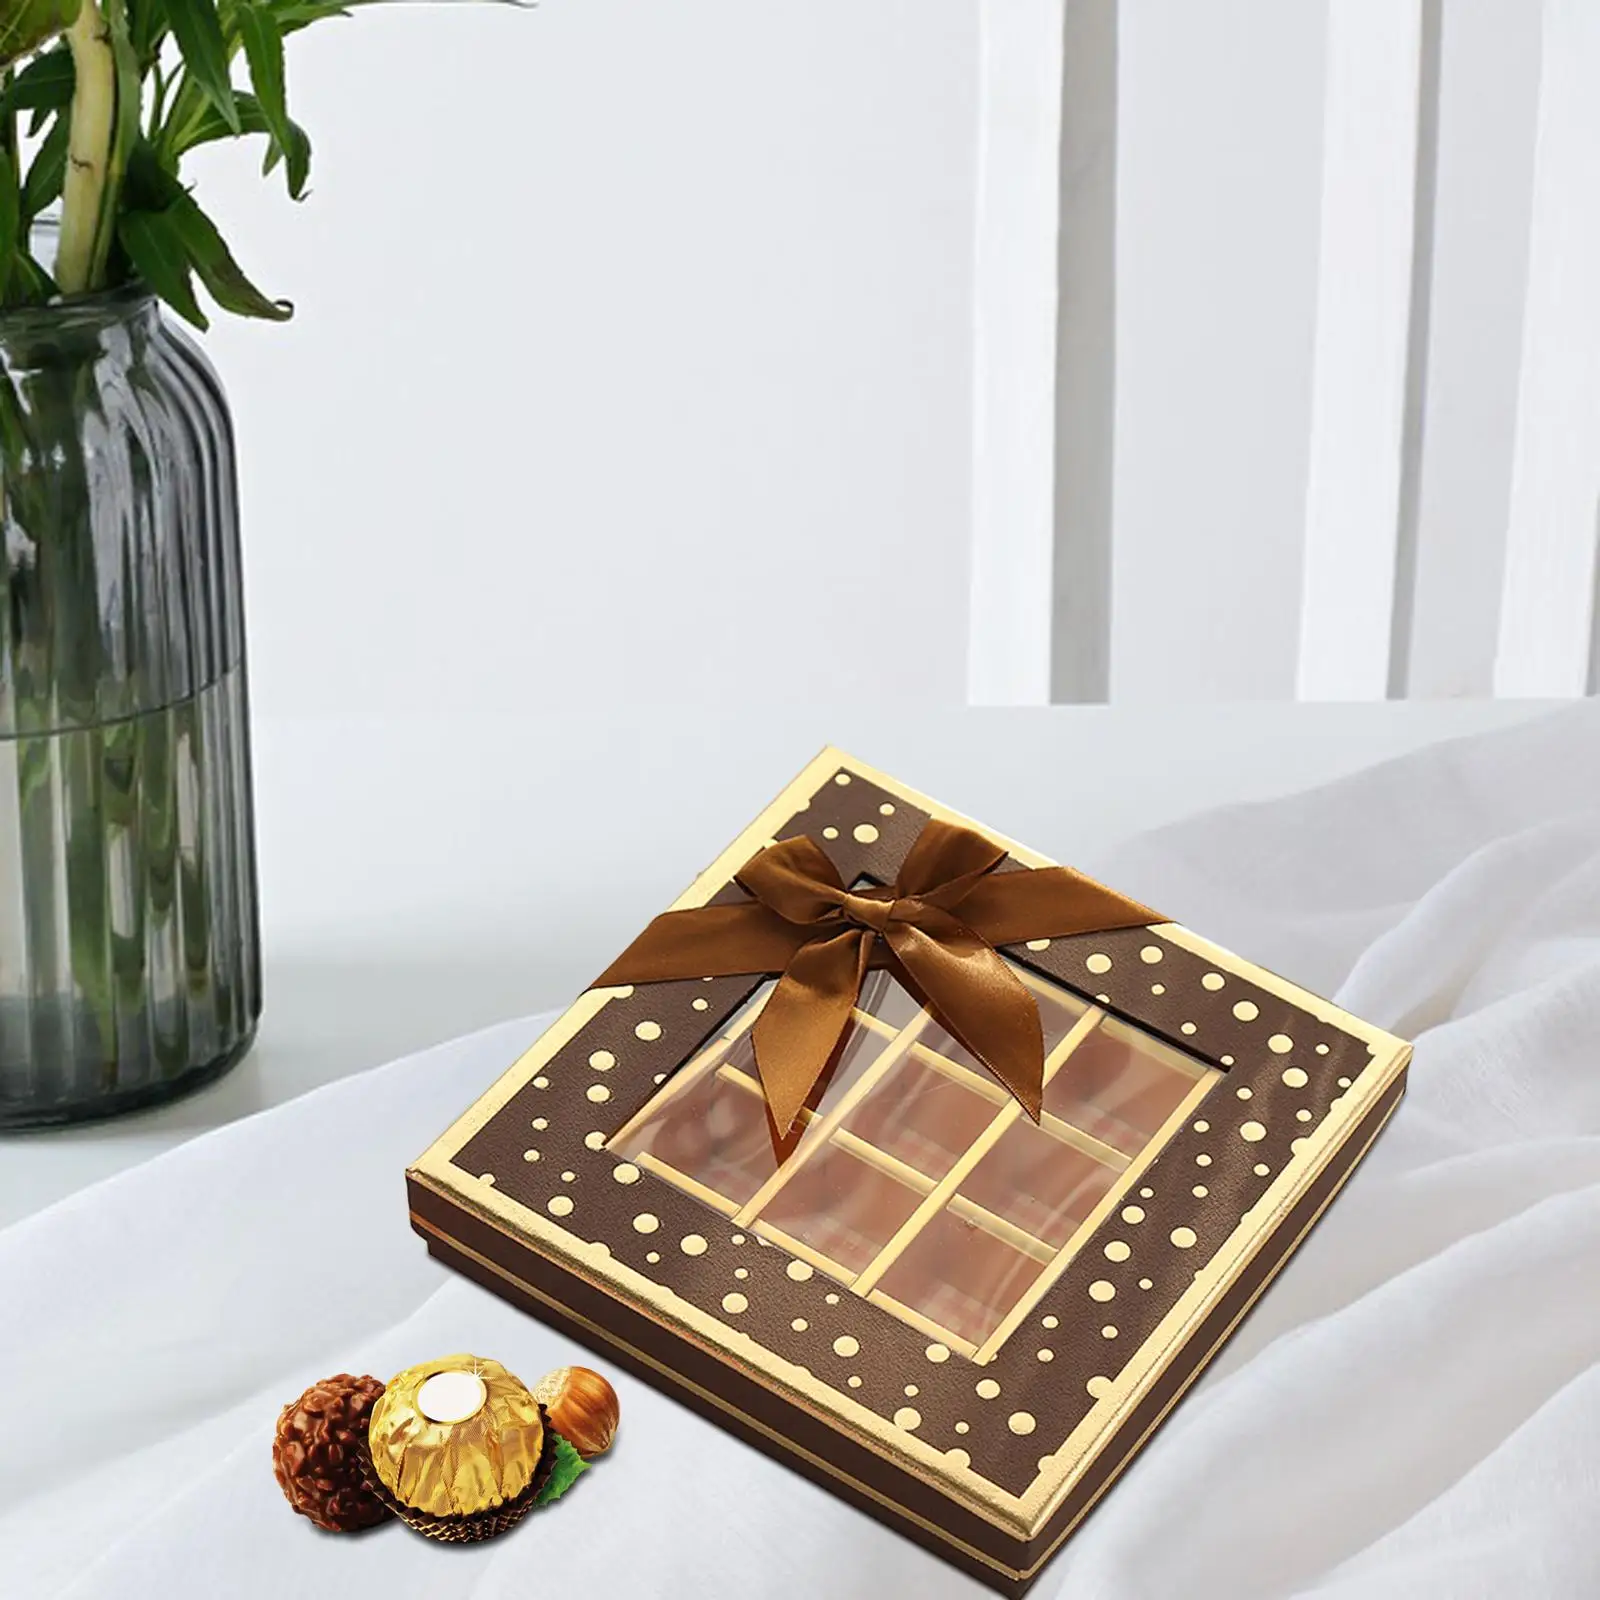 Chocolate Box 25 Inner Grids Valentines Day Gift for Wife Husband Wedding